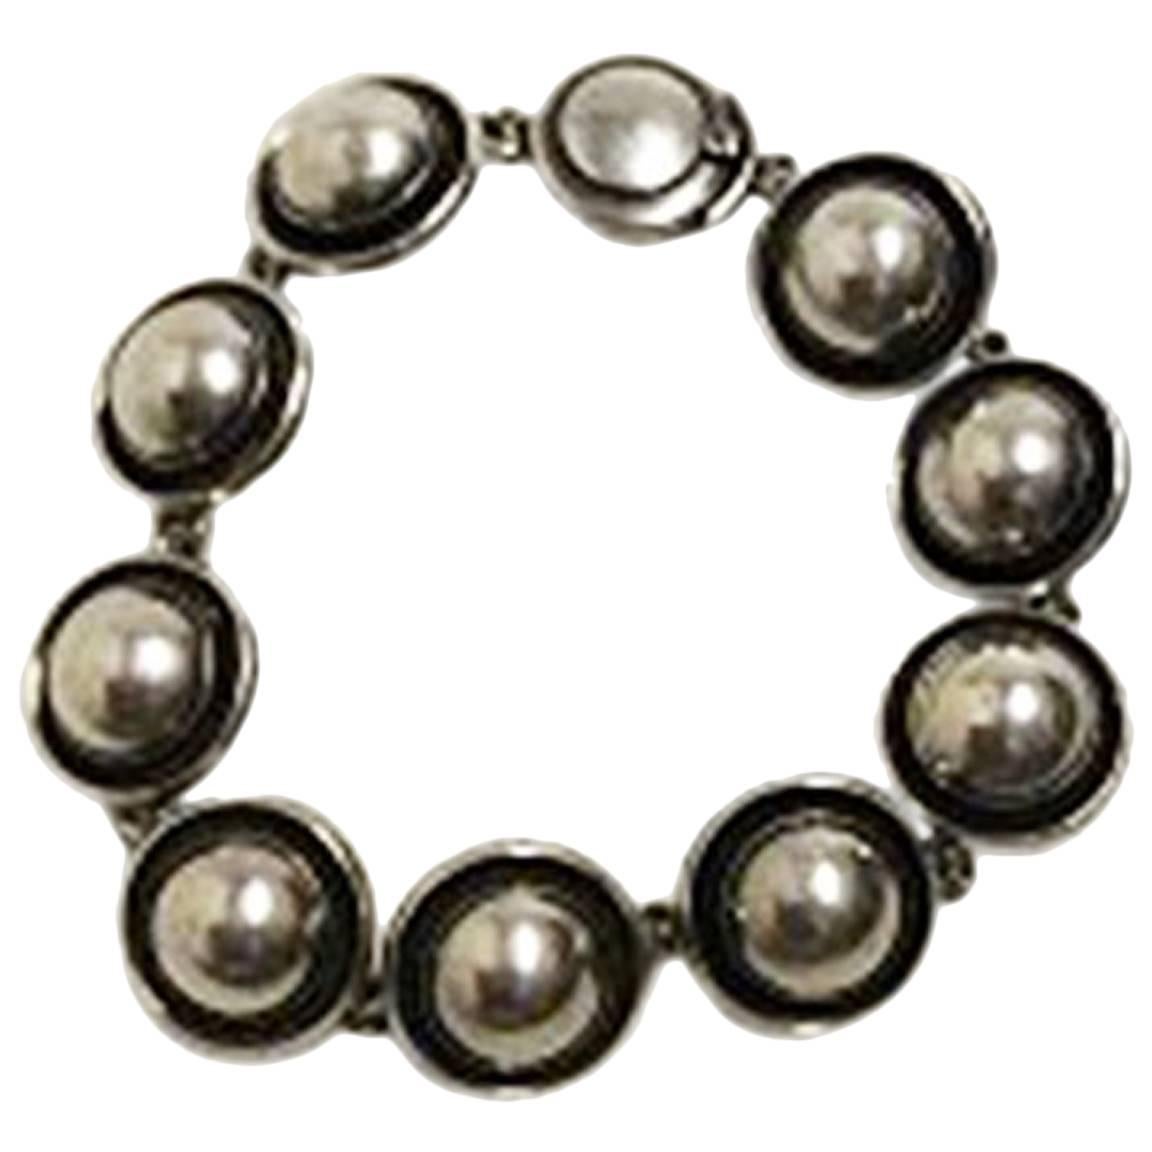 Niels Erik From Sterling Silver Bracelet with Silver Stones